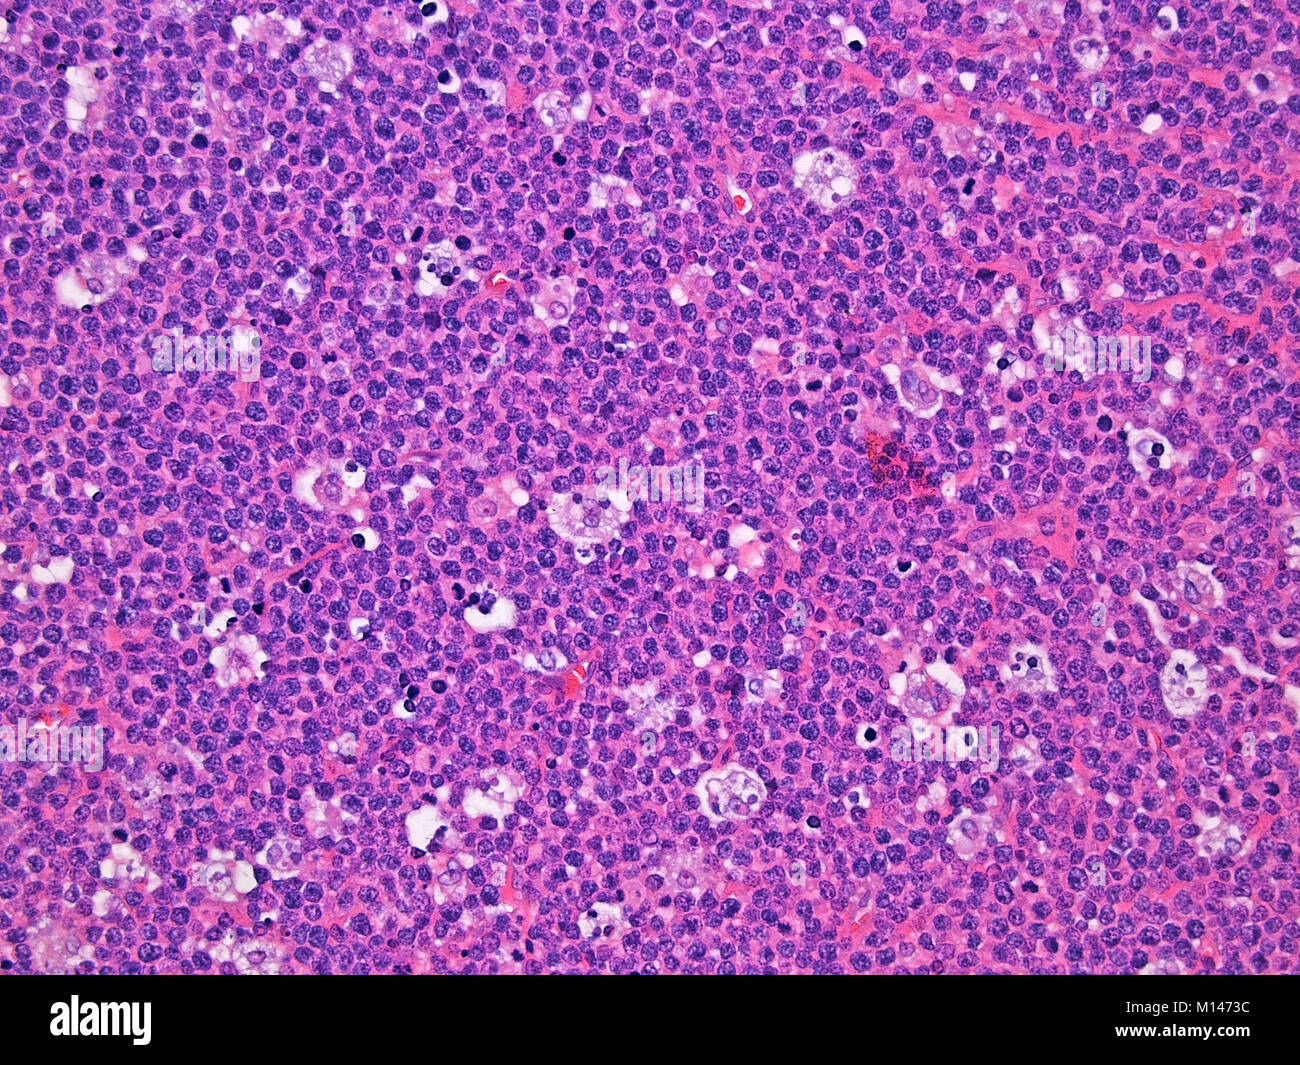 Burkitt Lymphoma in the Lymph Nodes Viewed at 300x Magnification with Haemotoxylin and Eosin Staining Stock Photo